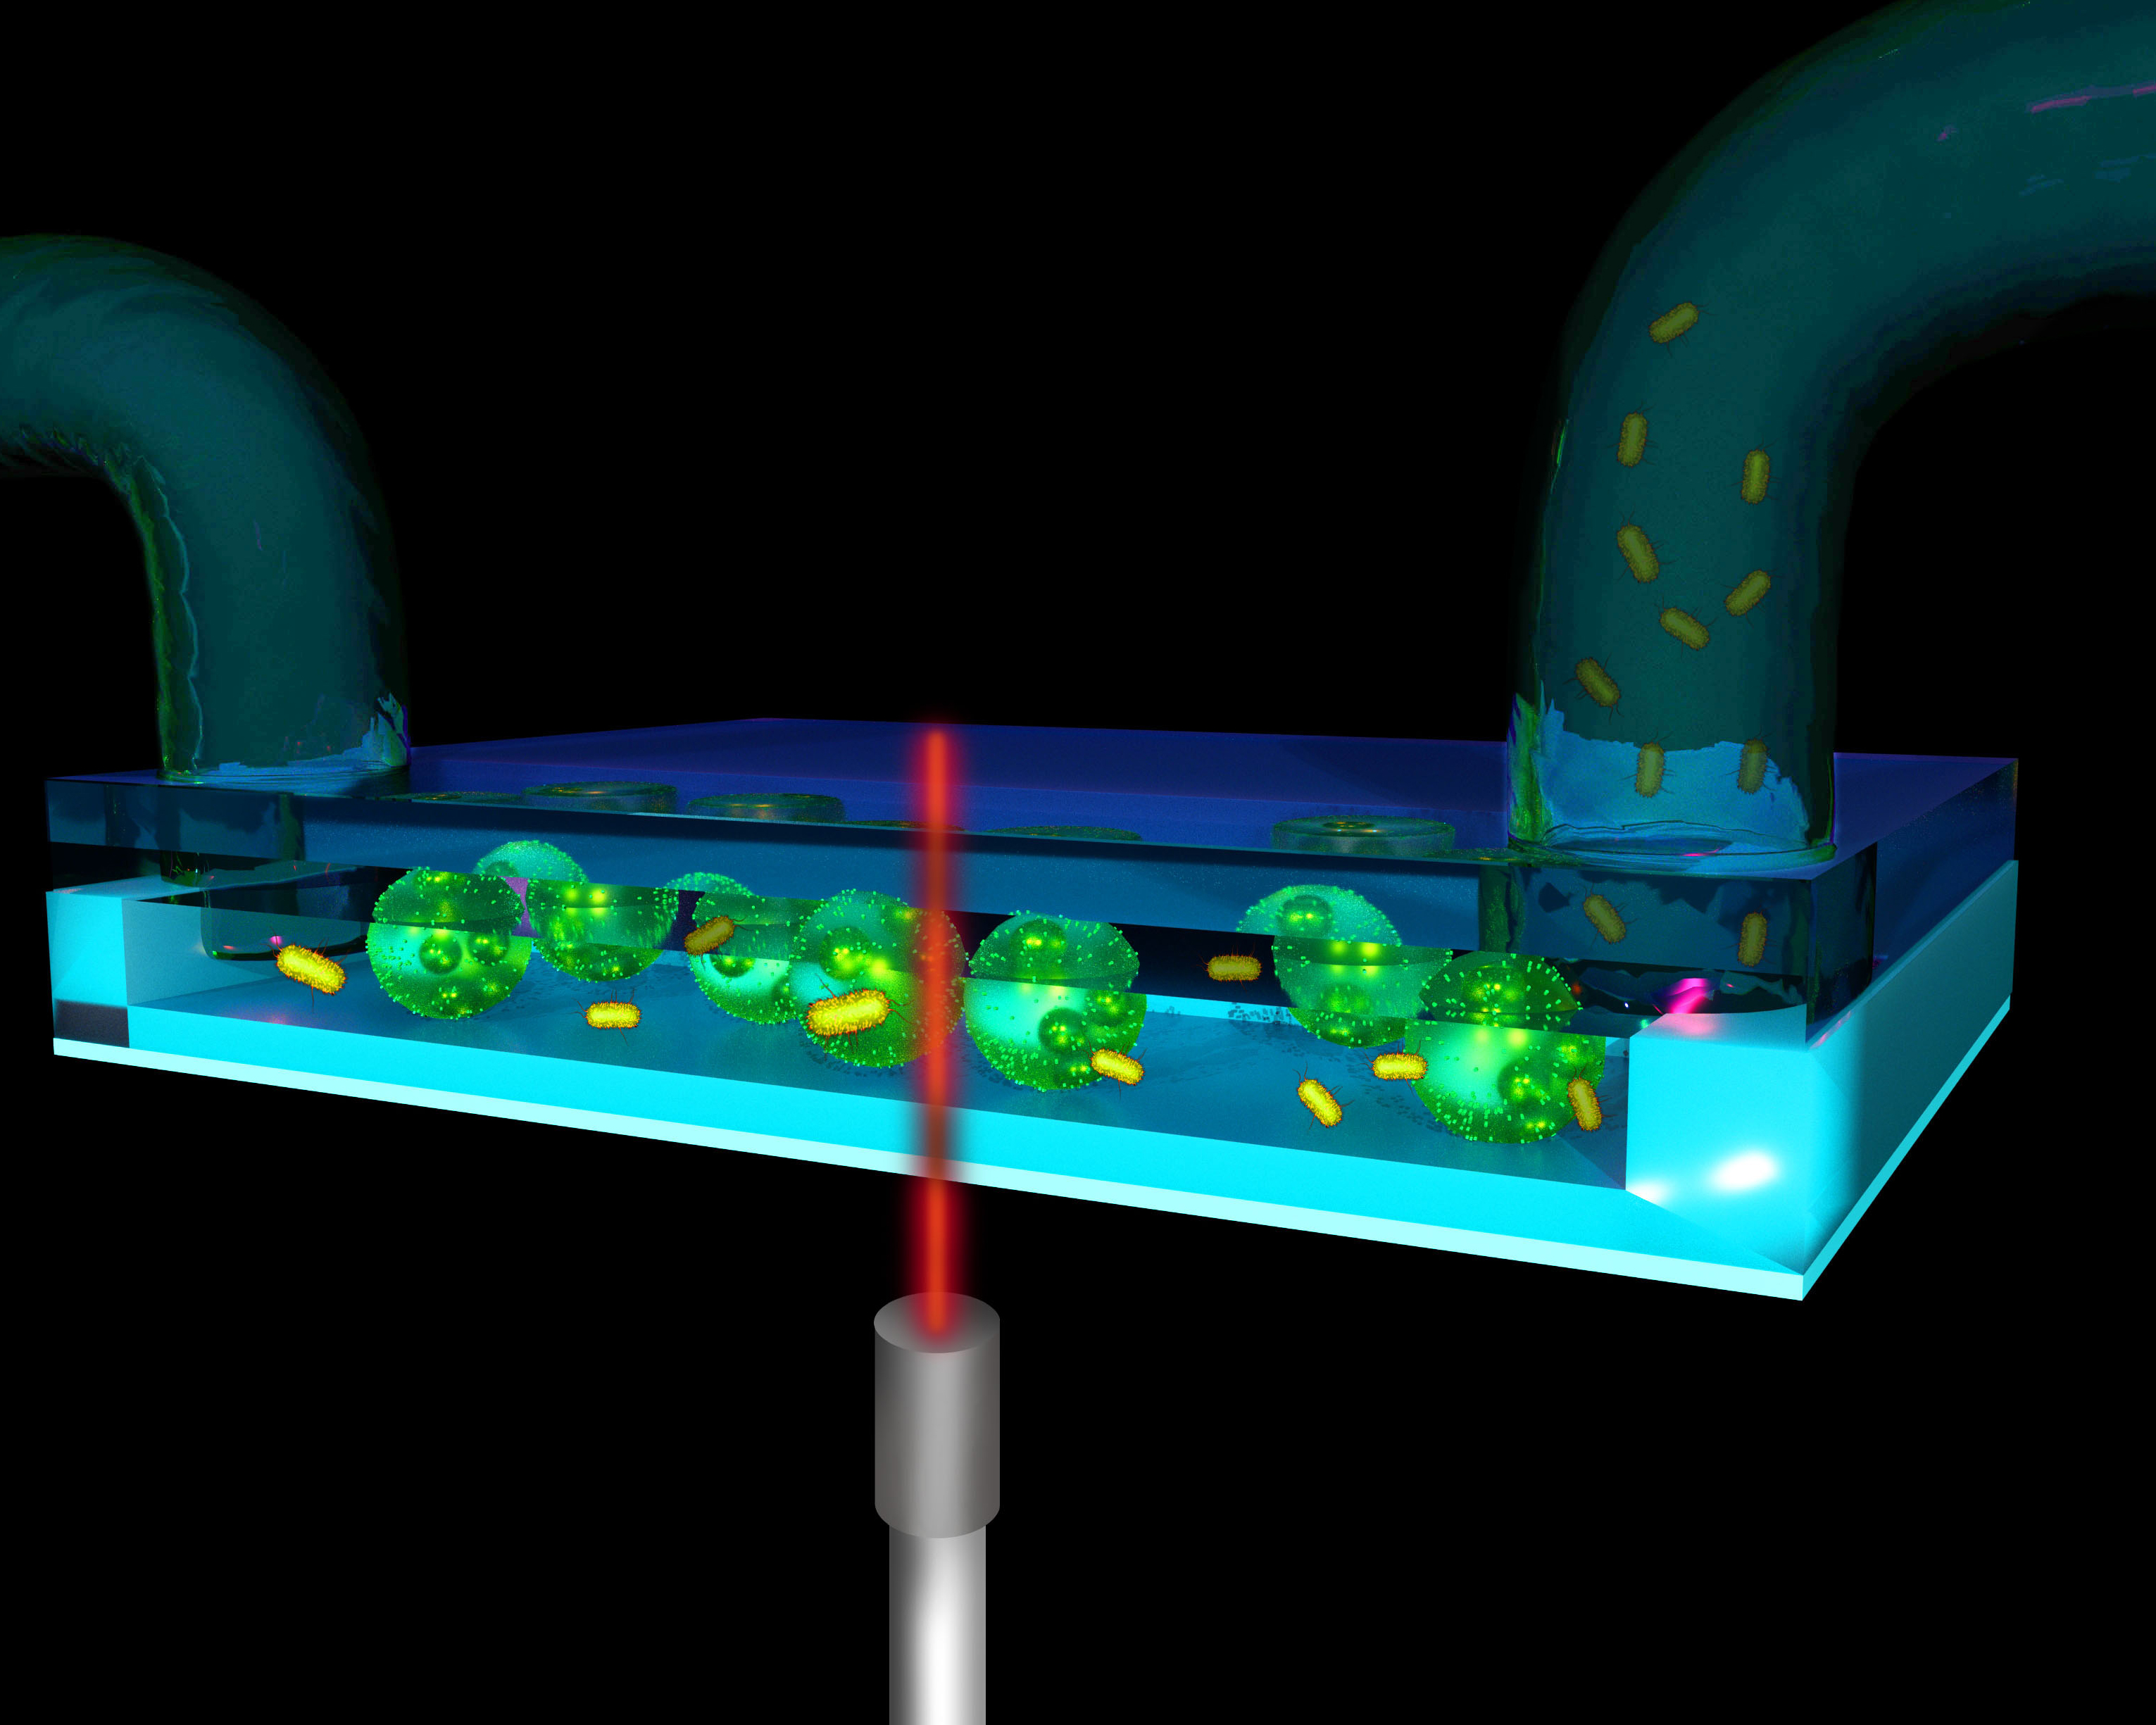 illustration of the inside of a tubing system with bacterial cells and auto‐fluorescence